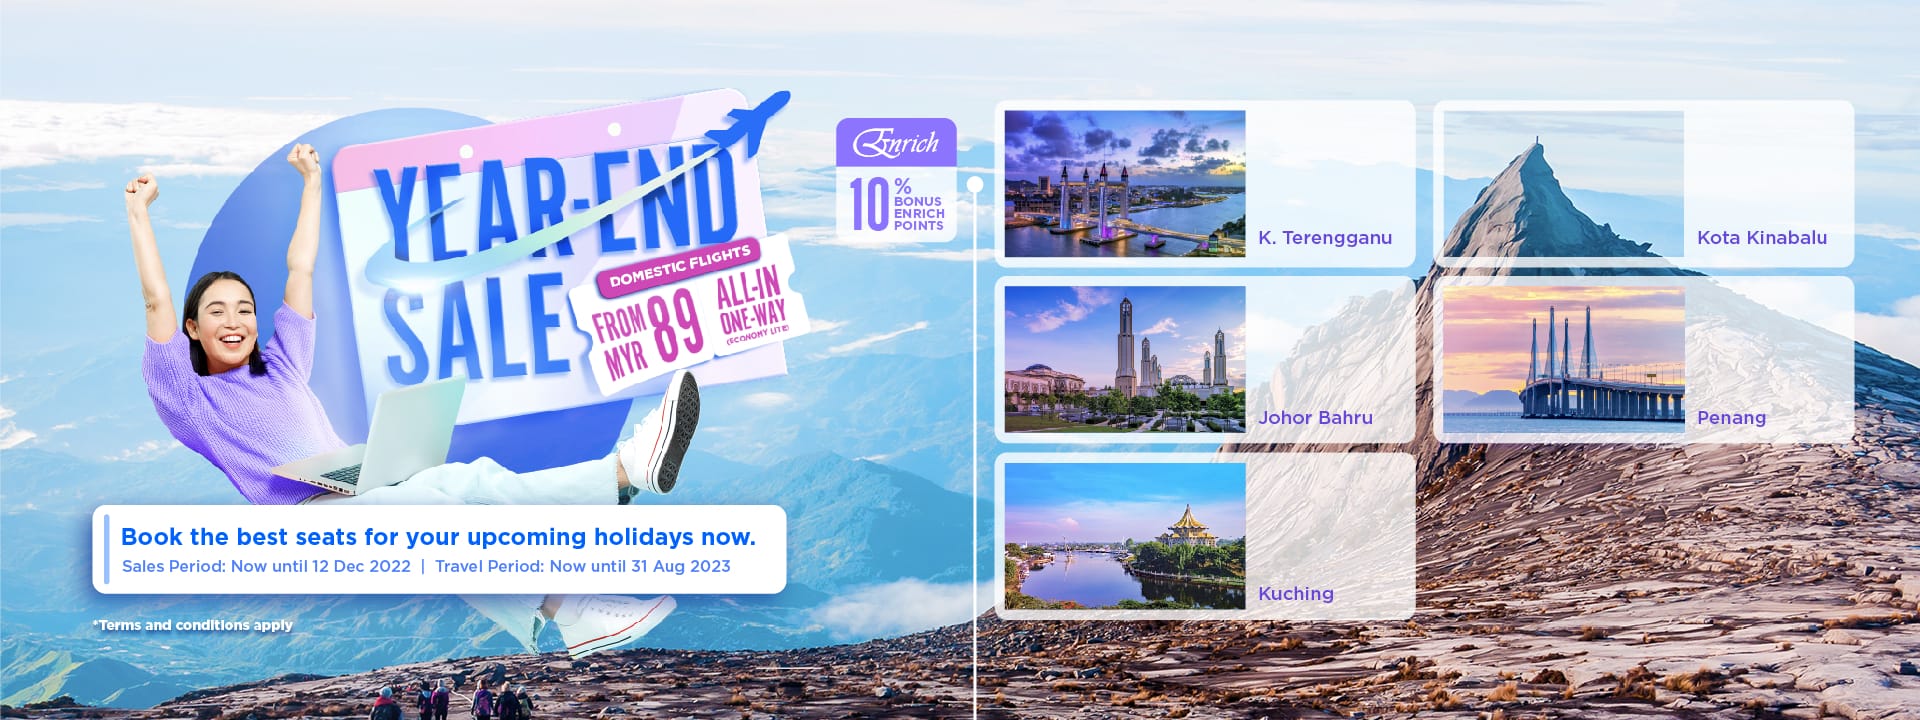 Malaysia Airlines Year-End Sale - Domestic mh yes domestic